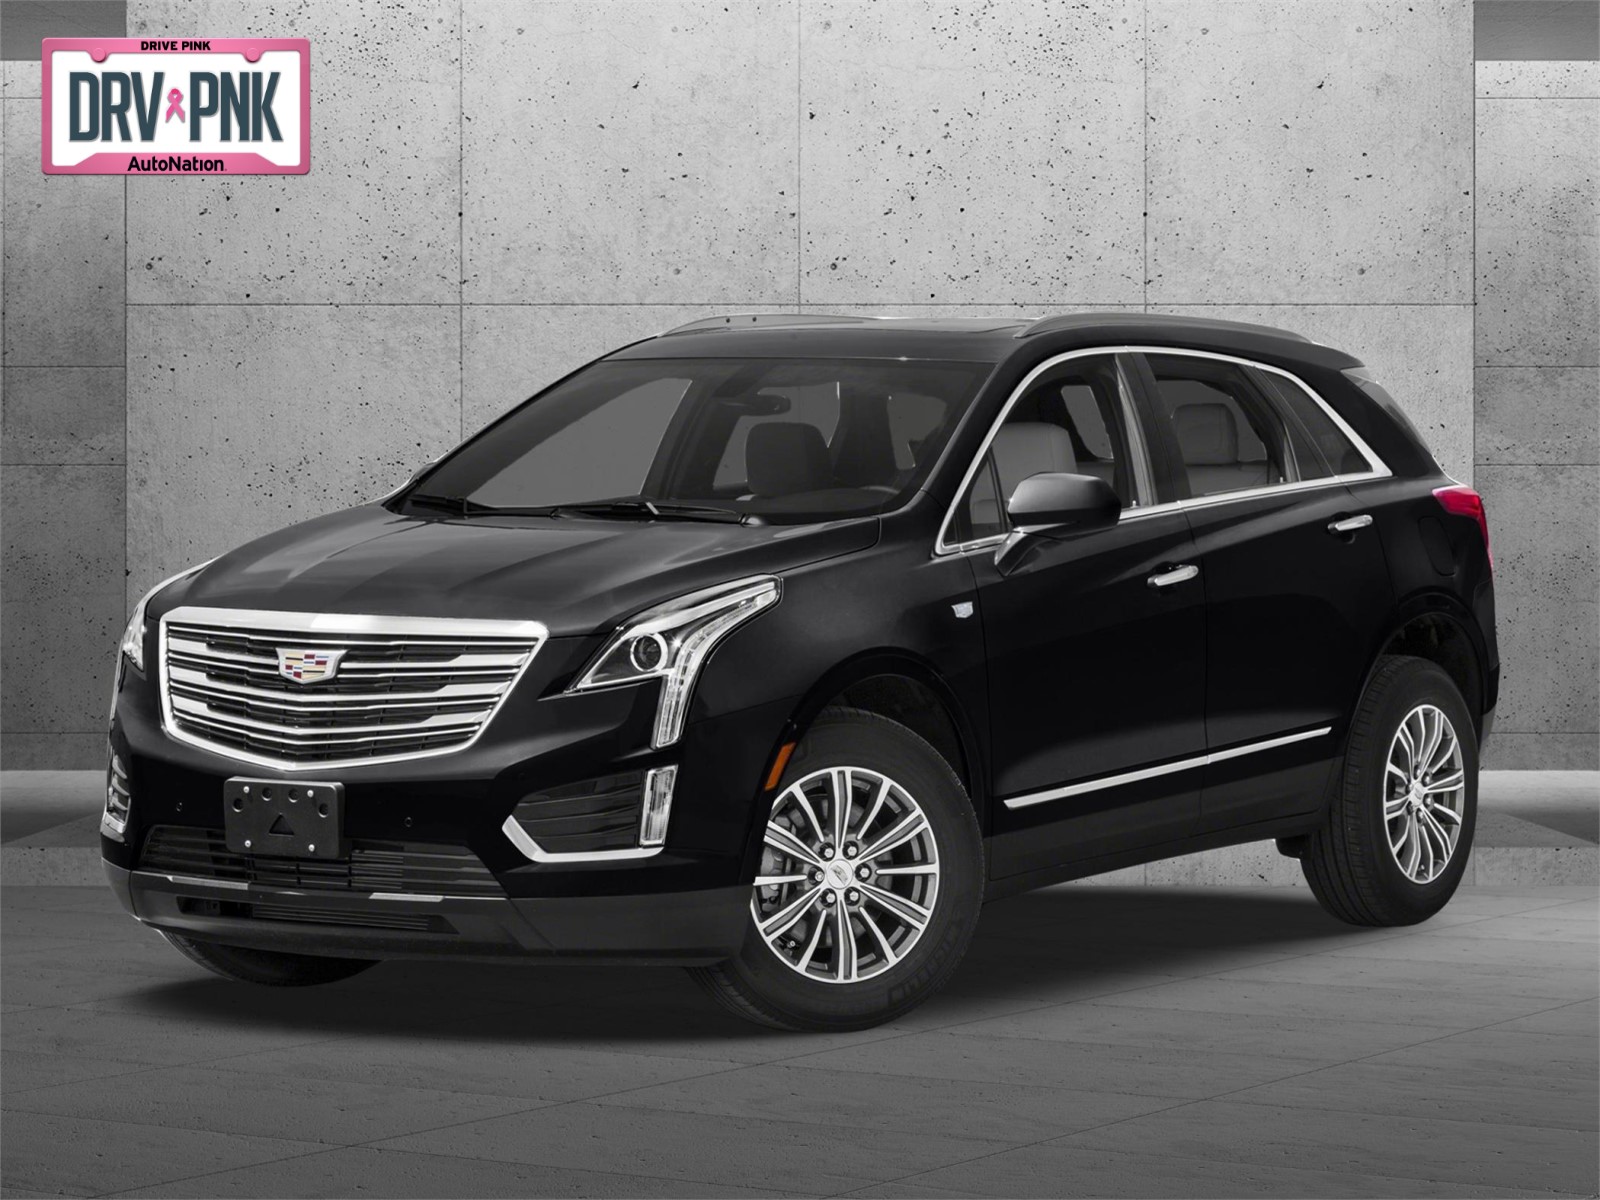 Pre-Owned 2019 Cadillac XT5 Luxury FWD Sport Utility in Clearwater  #KZ294182 | Lexus of Clearwater